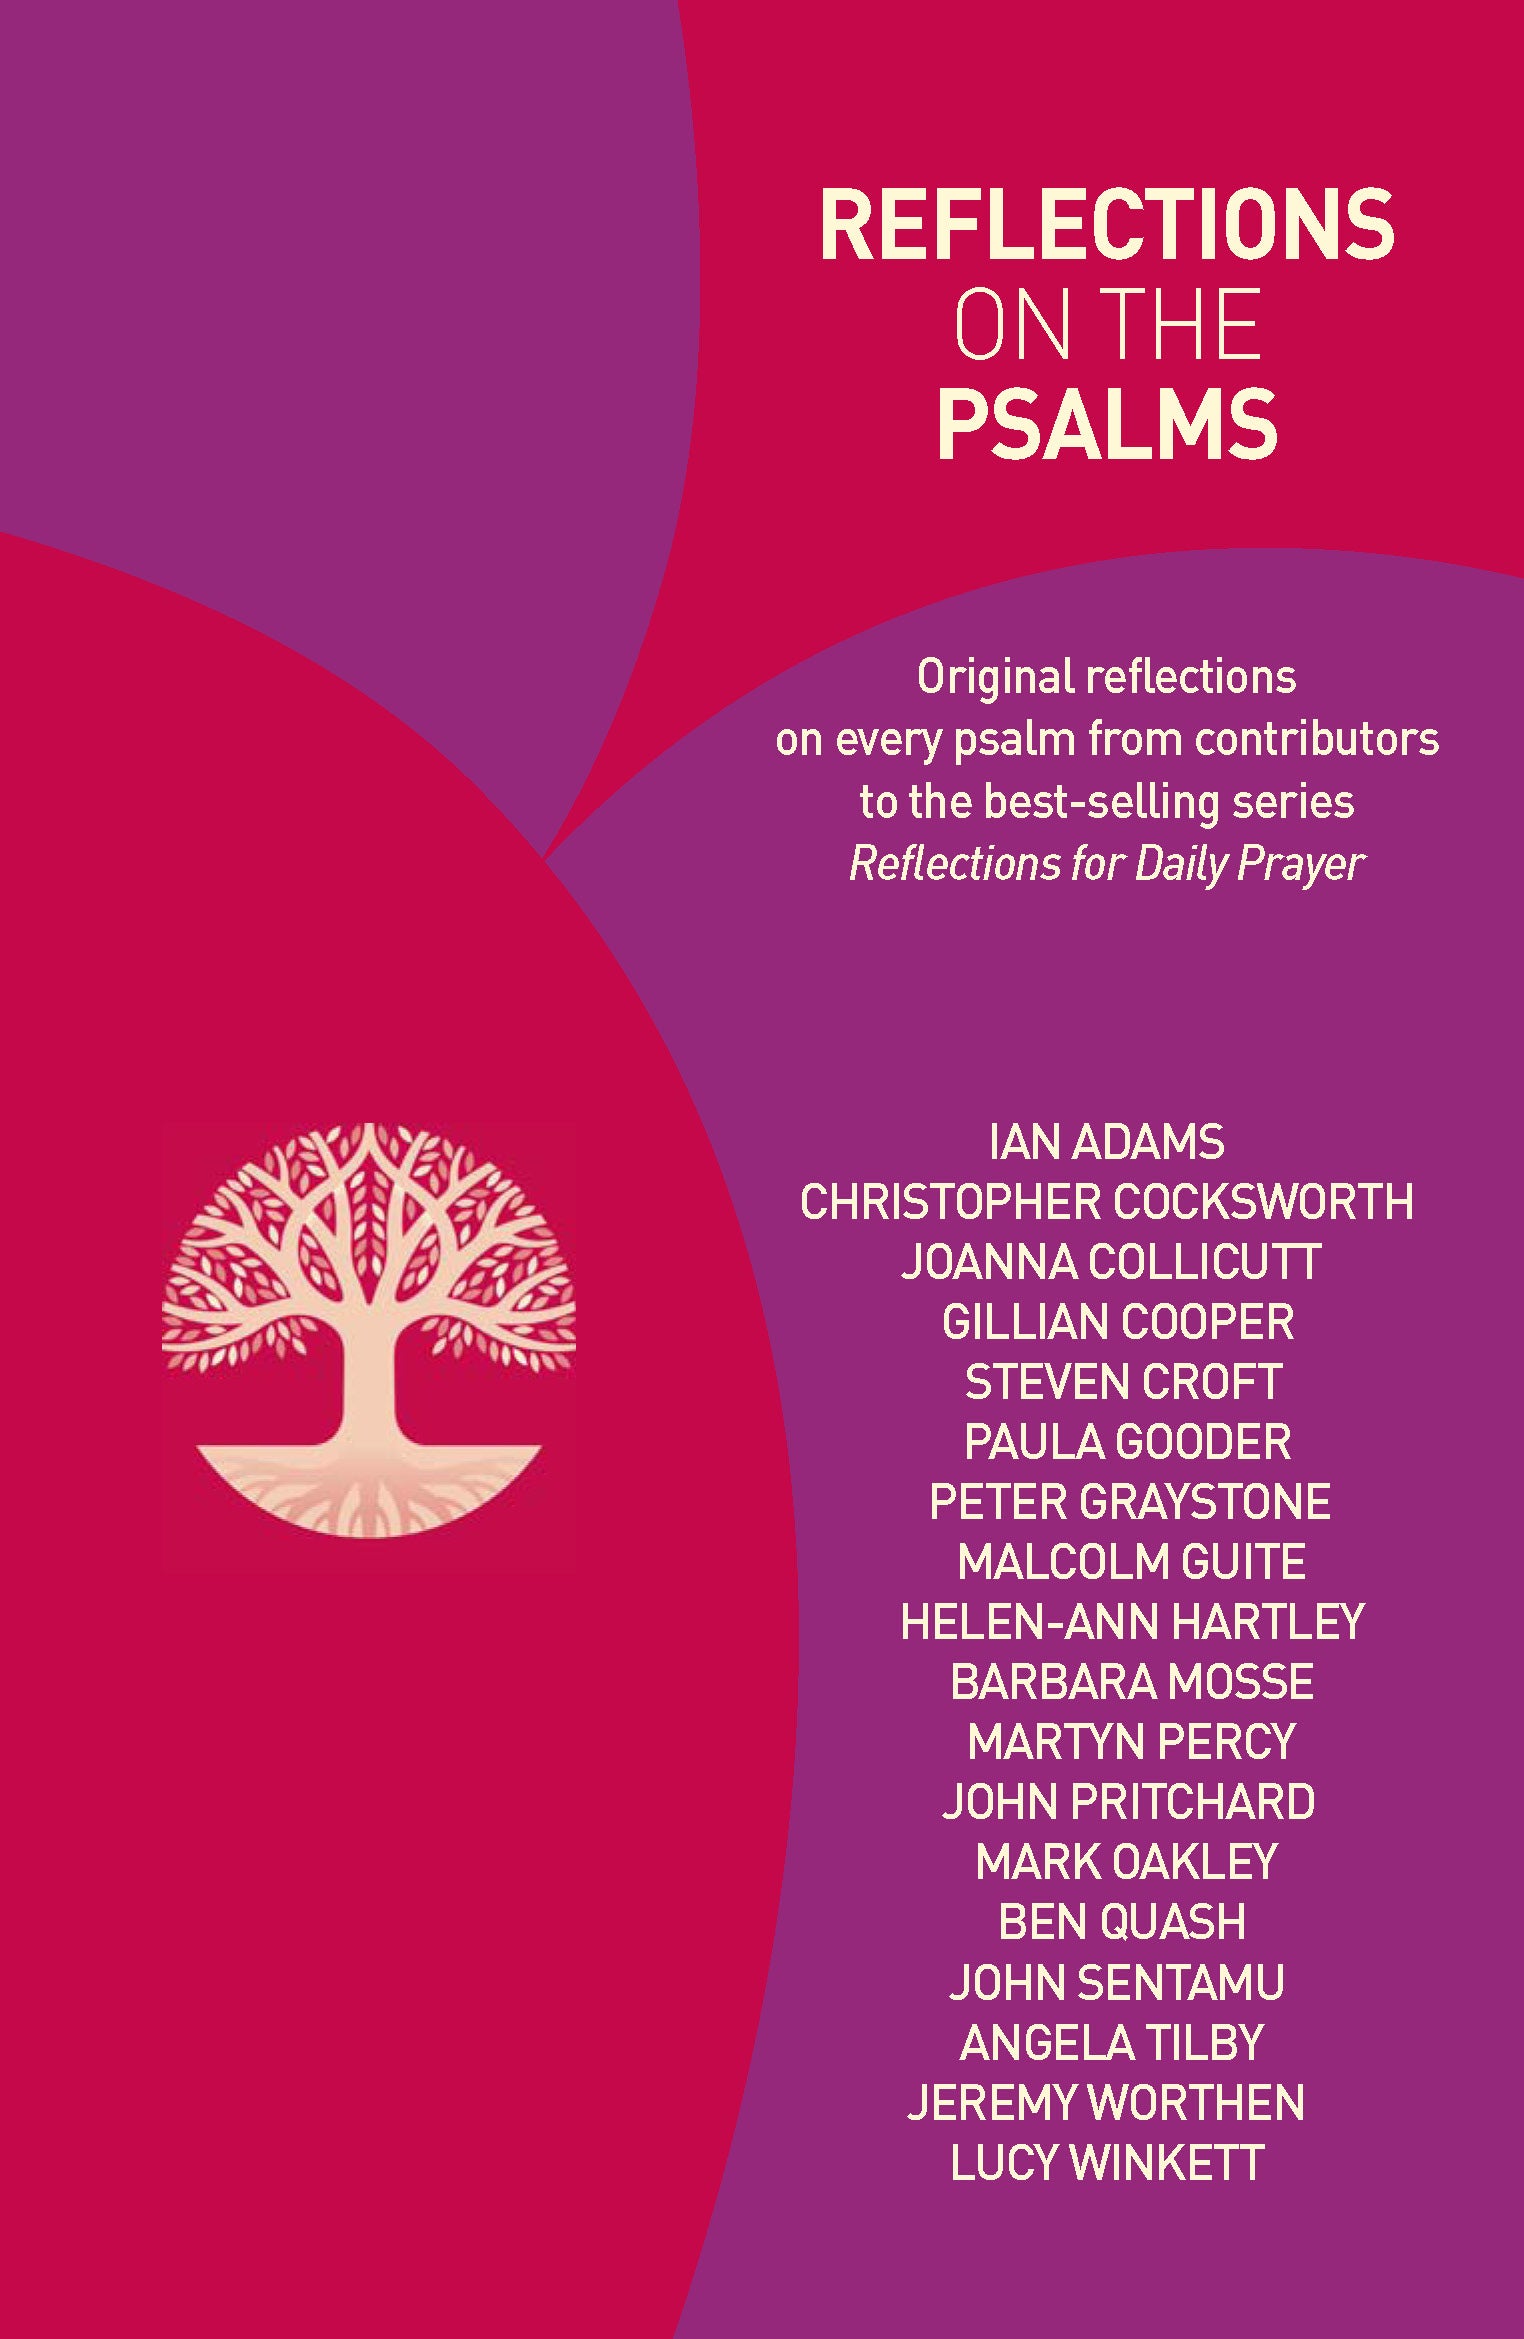 Image of Reflections on the Psalms other